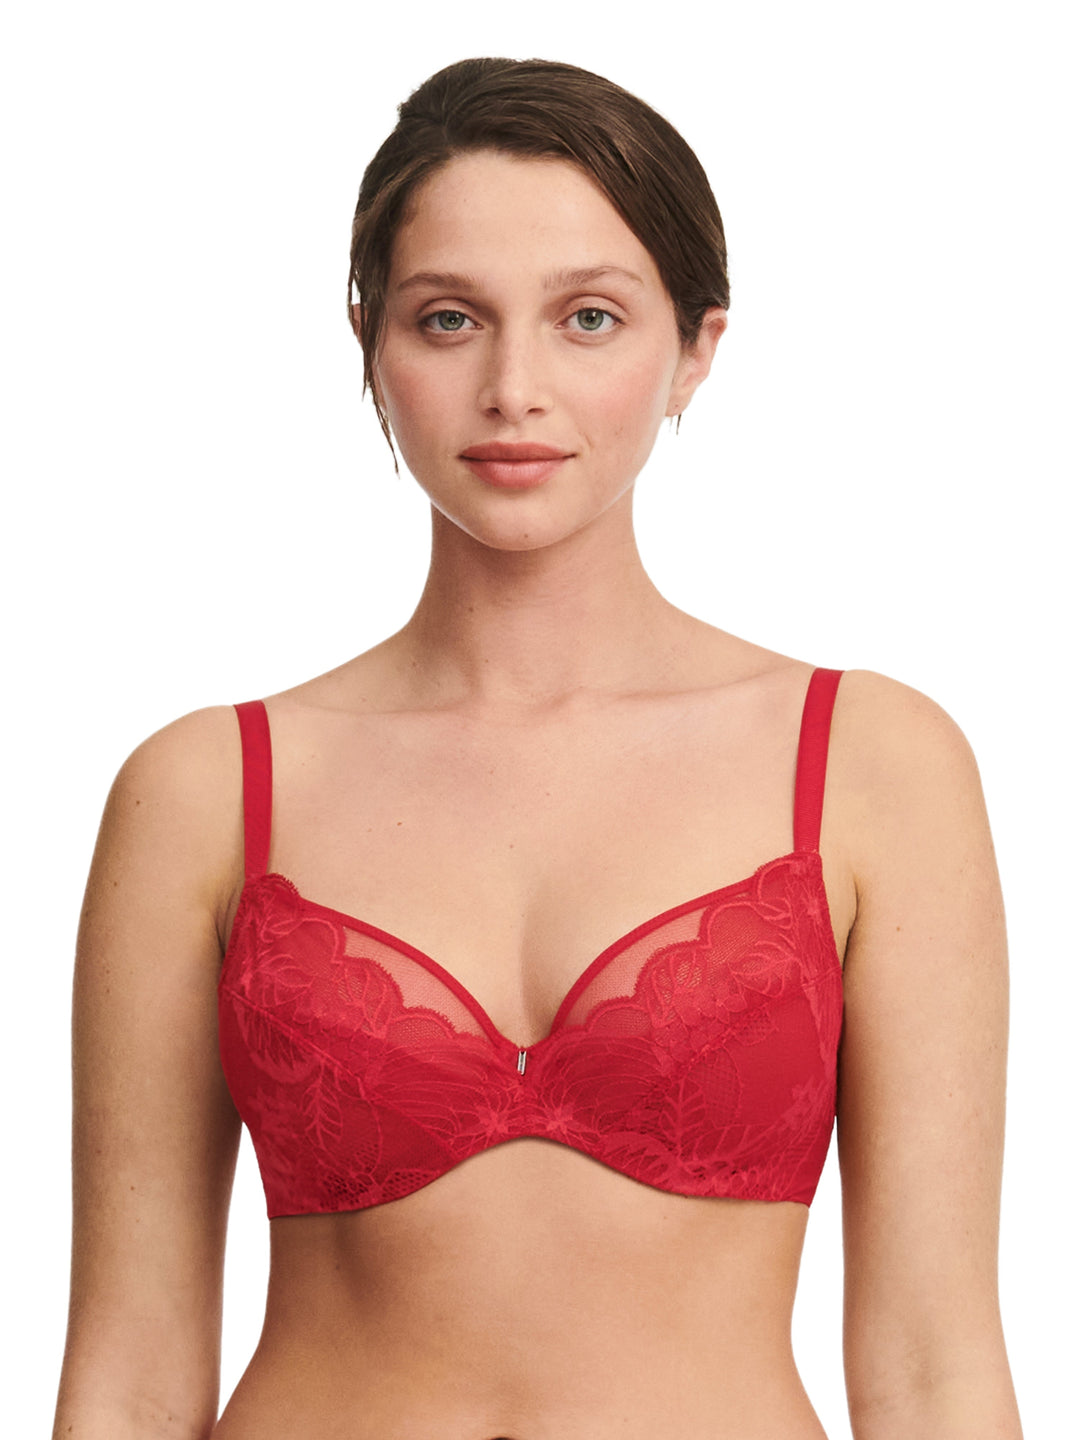 Chantelle - Midnight Flowers Covering Underwired Bra Scarlet Full Cup Bra Chantelle 